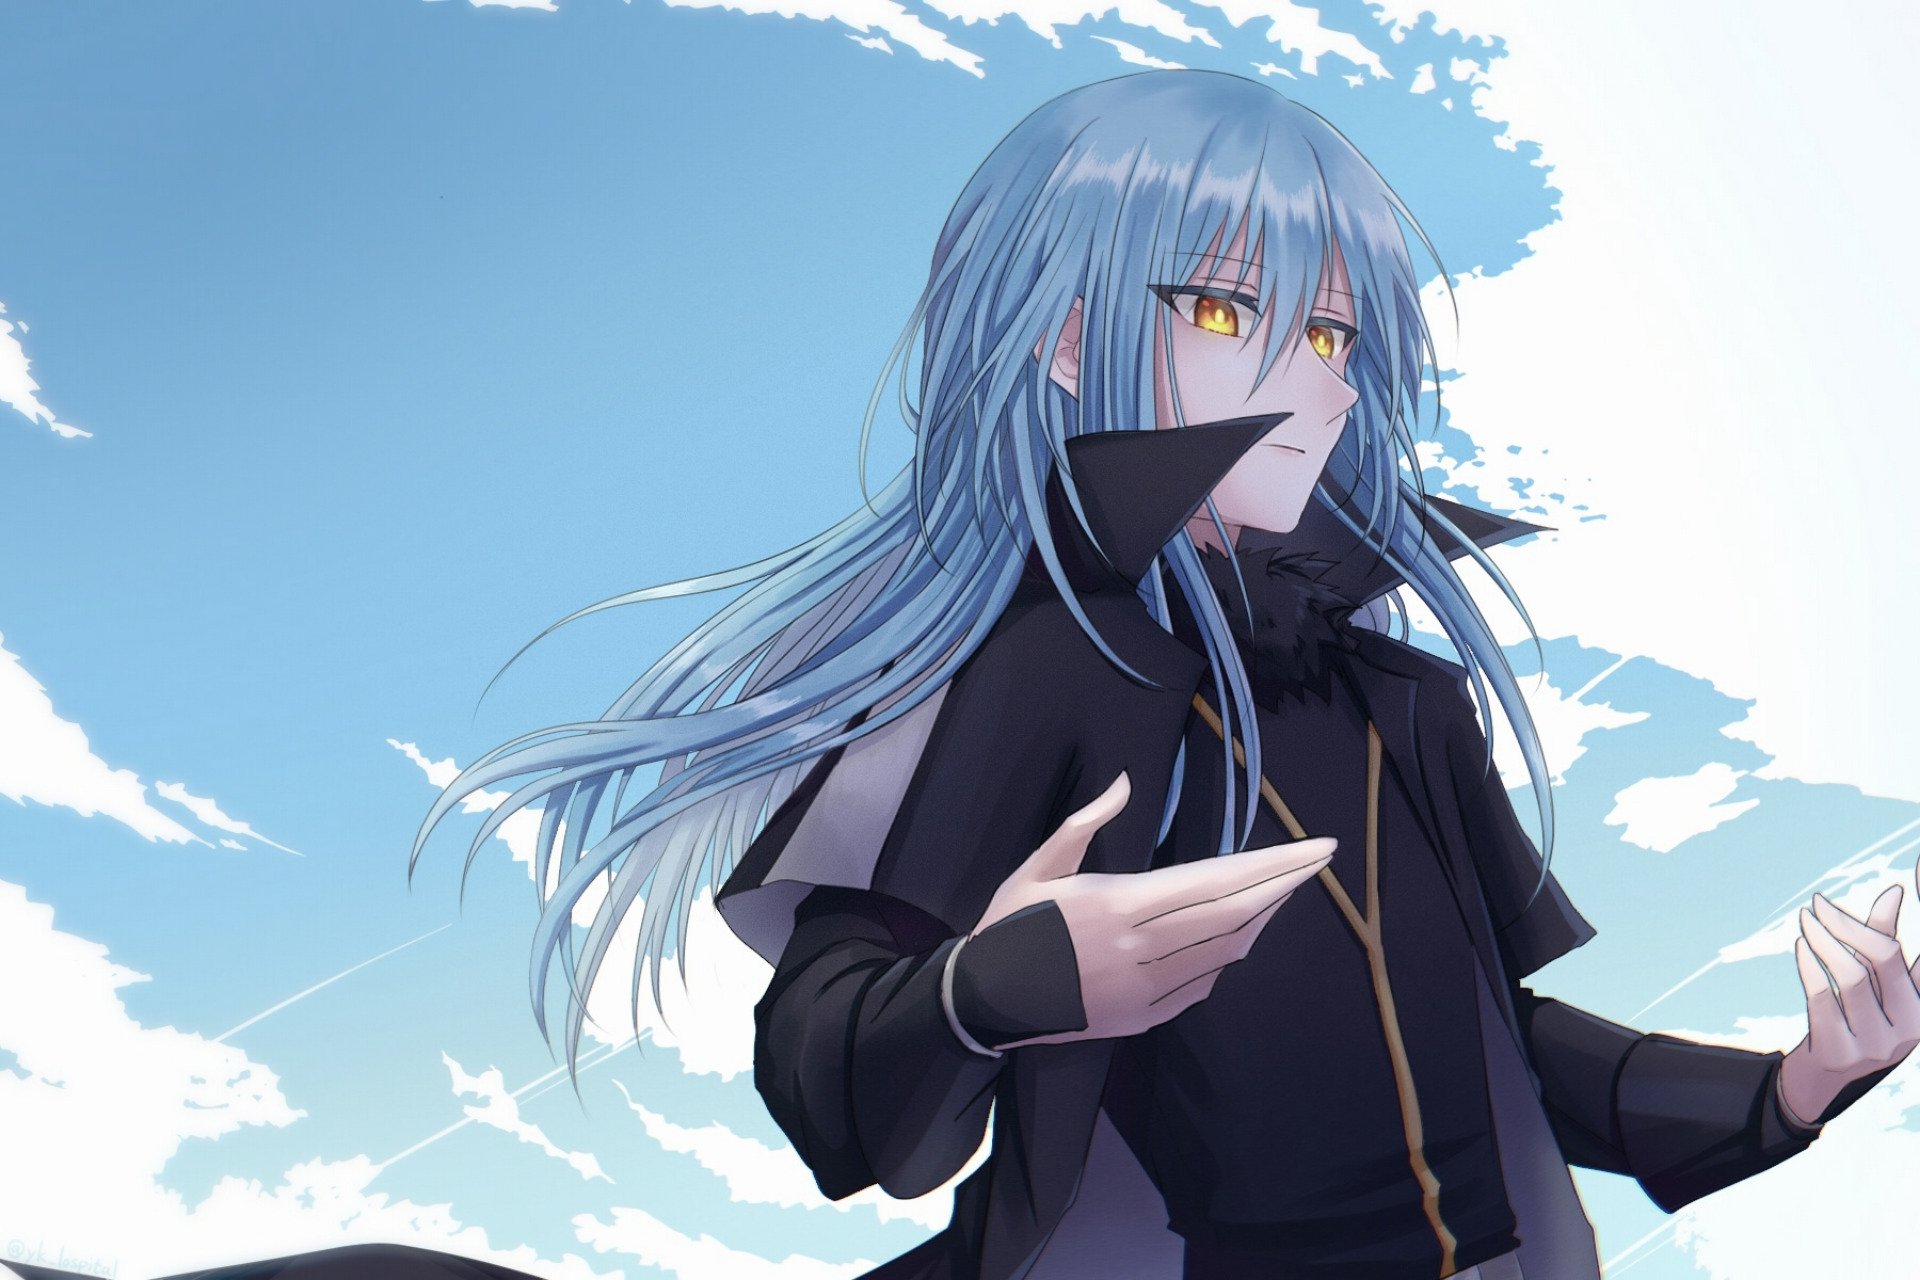 Rimuru Tempest from That Time I Got Reincarnated as a Slime in a captivating HD desktop wallpaper.